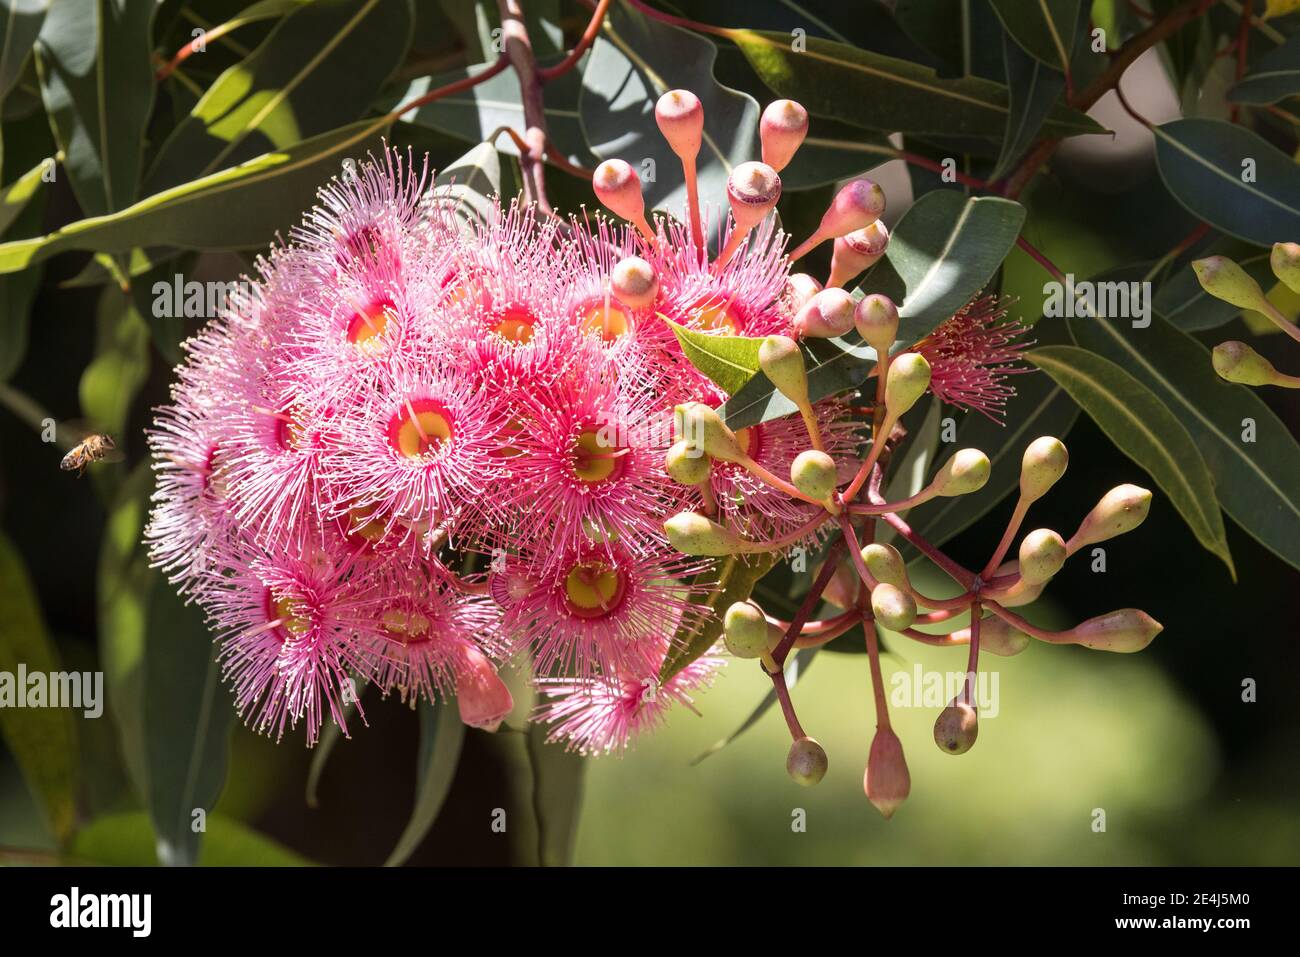 Flowers and flower buds of the Australian Pink Flowering Gum Stock Photo